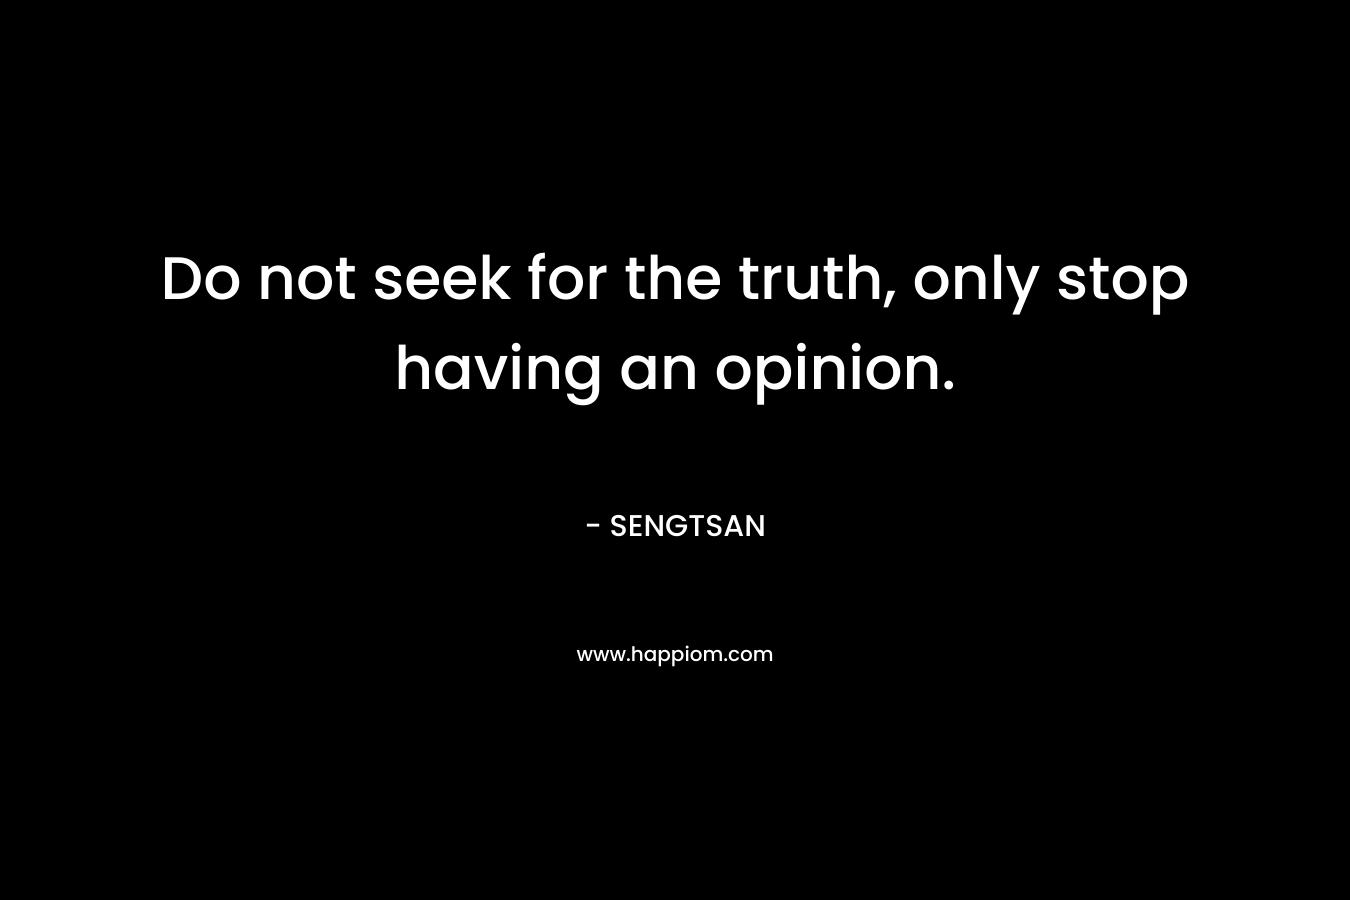 Do not seek for the truth, only stop having an opinion. – SENGTSAN